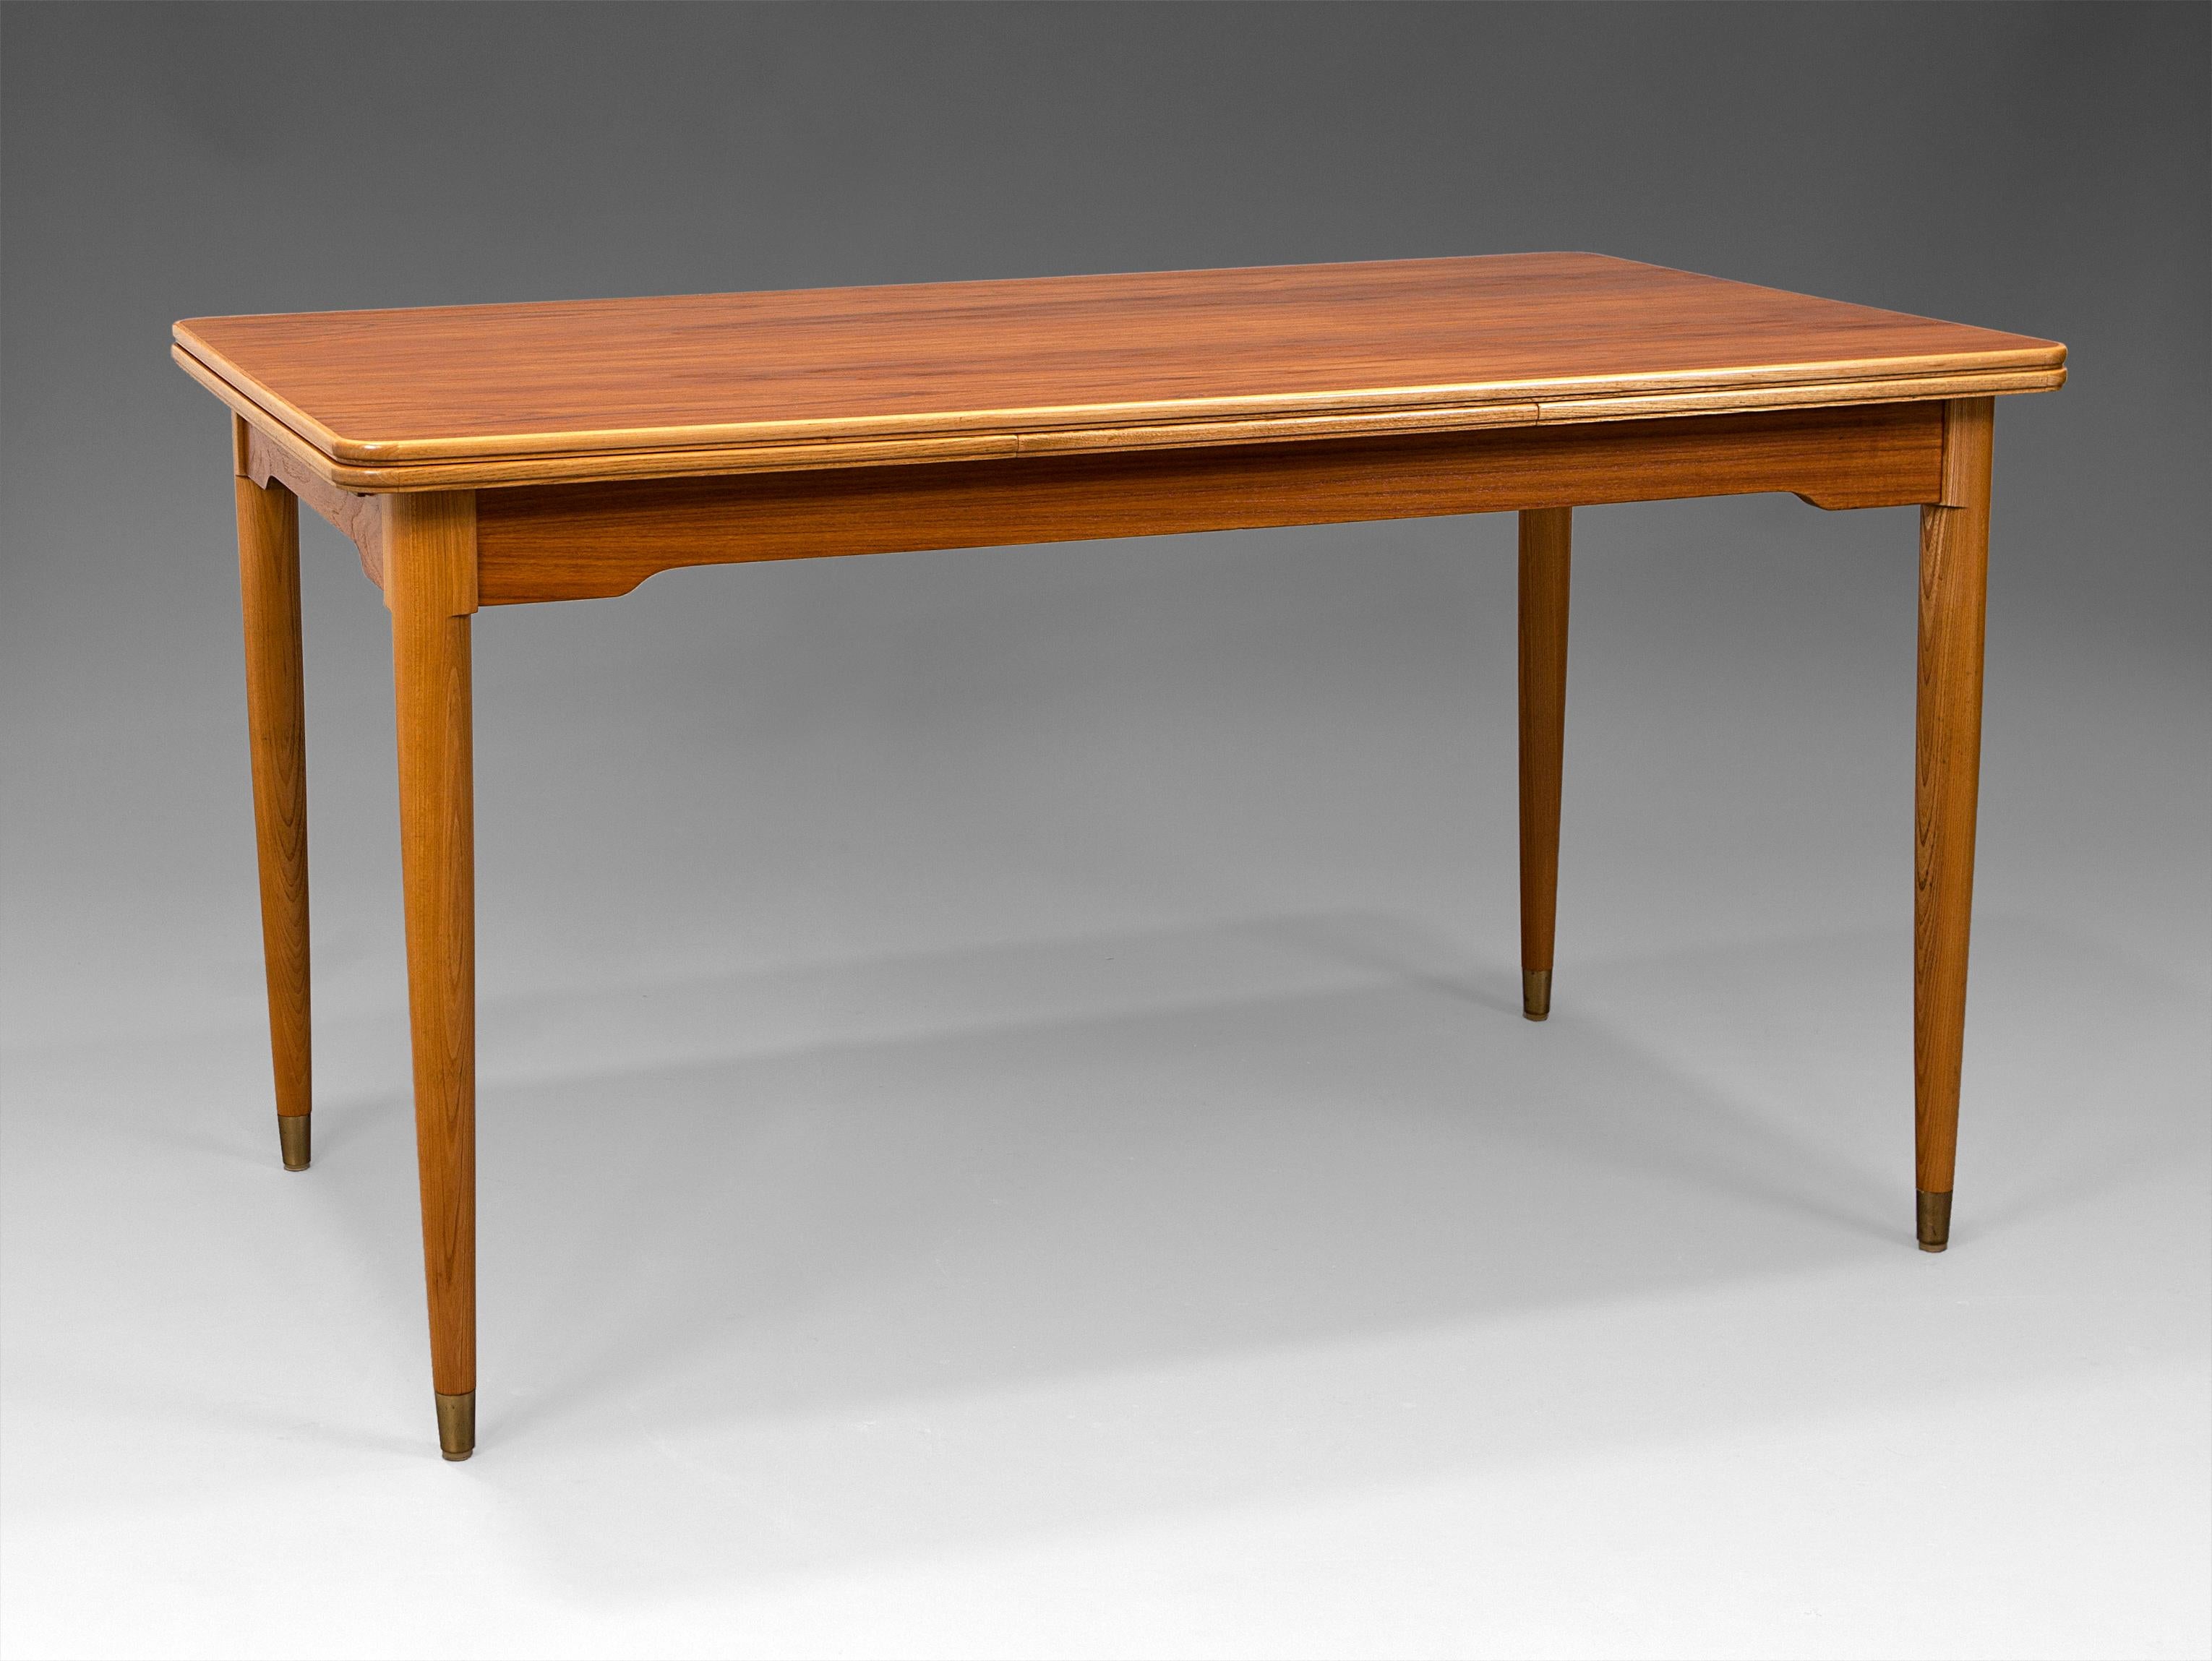 Dinning table with two extensions in teak and beech with brass leg trims, Sweden, 1960.
Fully refinished.
Measures: W.54,33in. (extensions 19.29in. each) D.32,28in. H.29,13in.
W.138cm (extensions 49cm each) D. 82cm, H.74 cm.